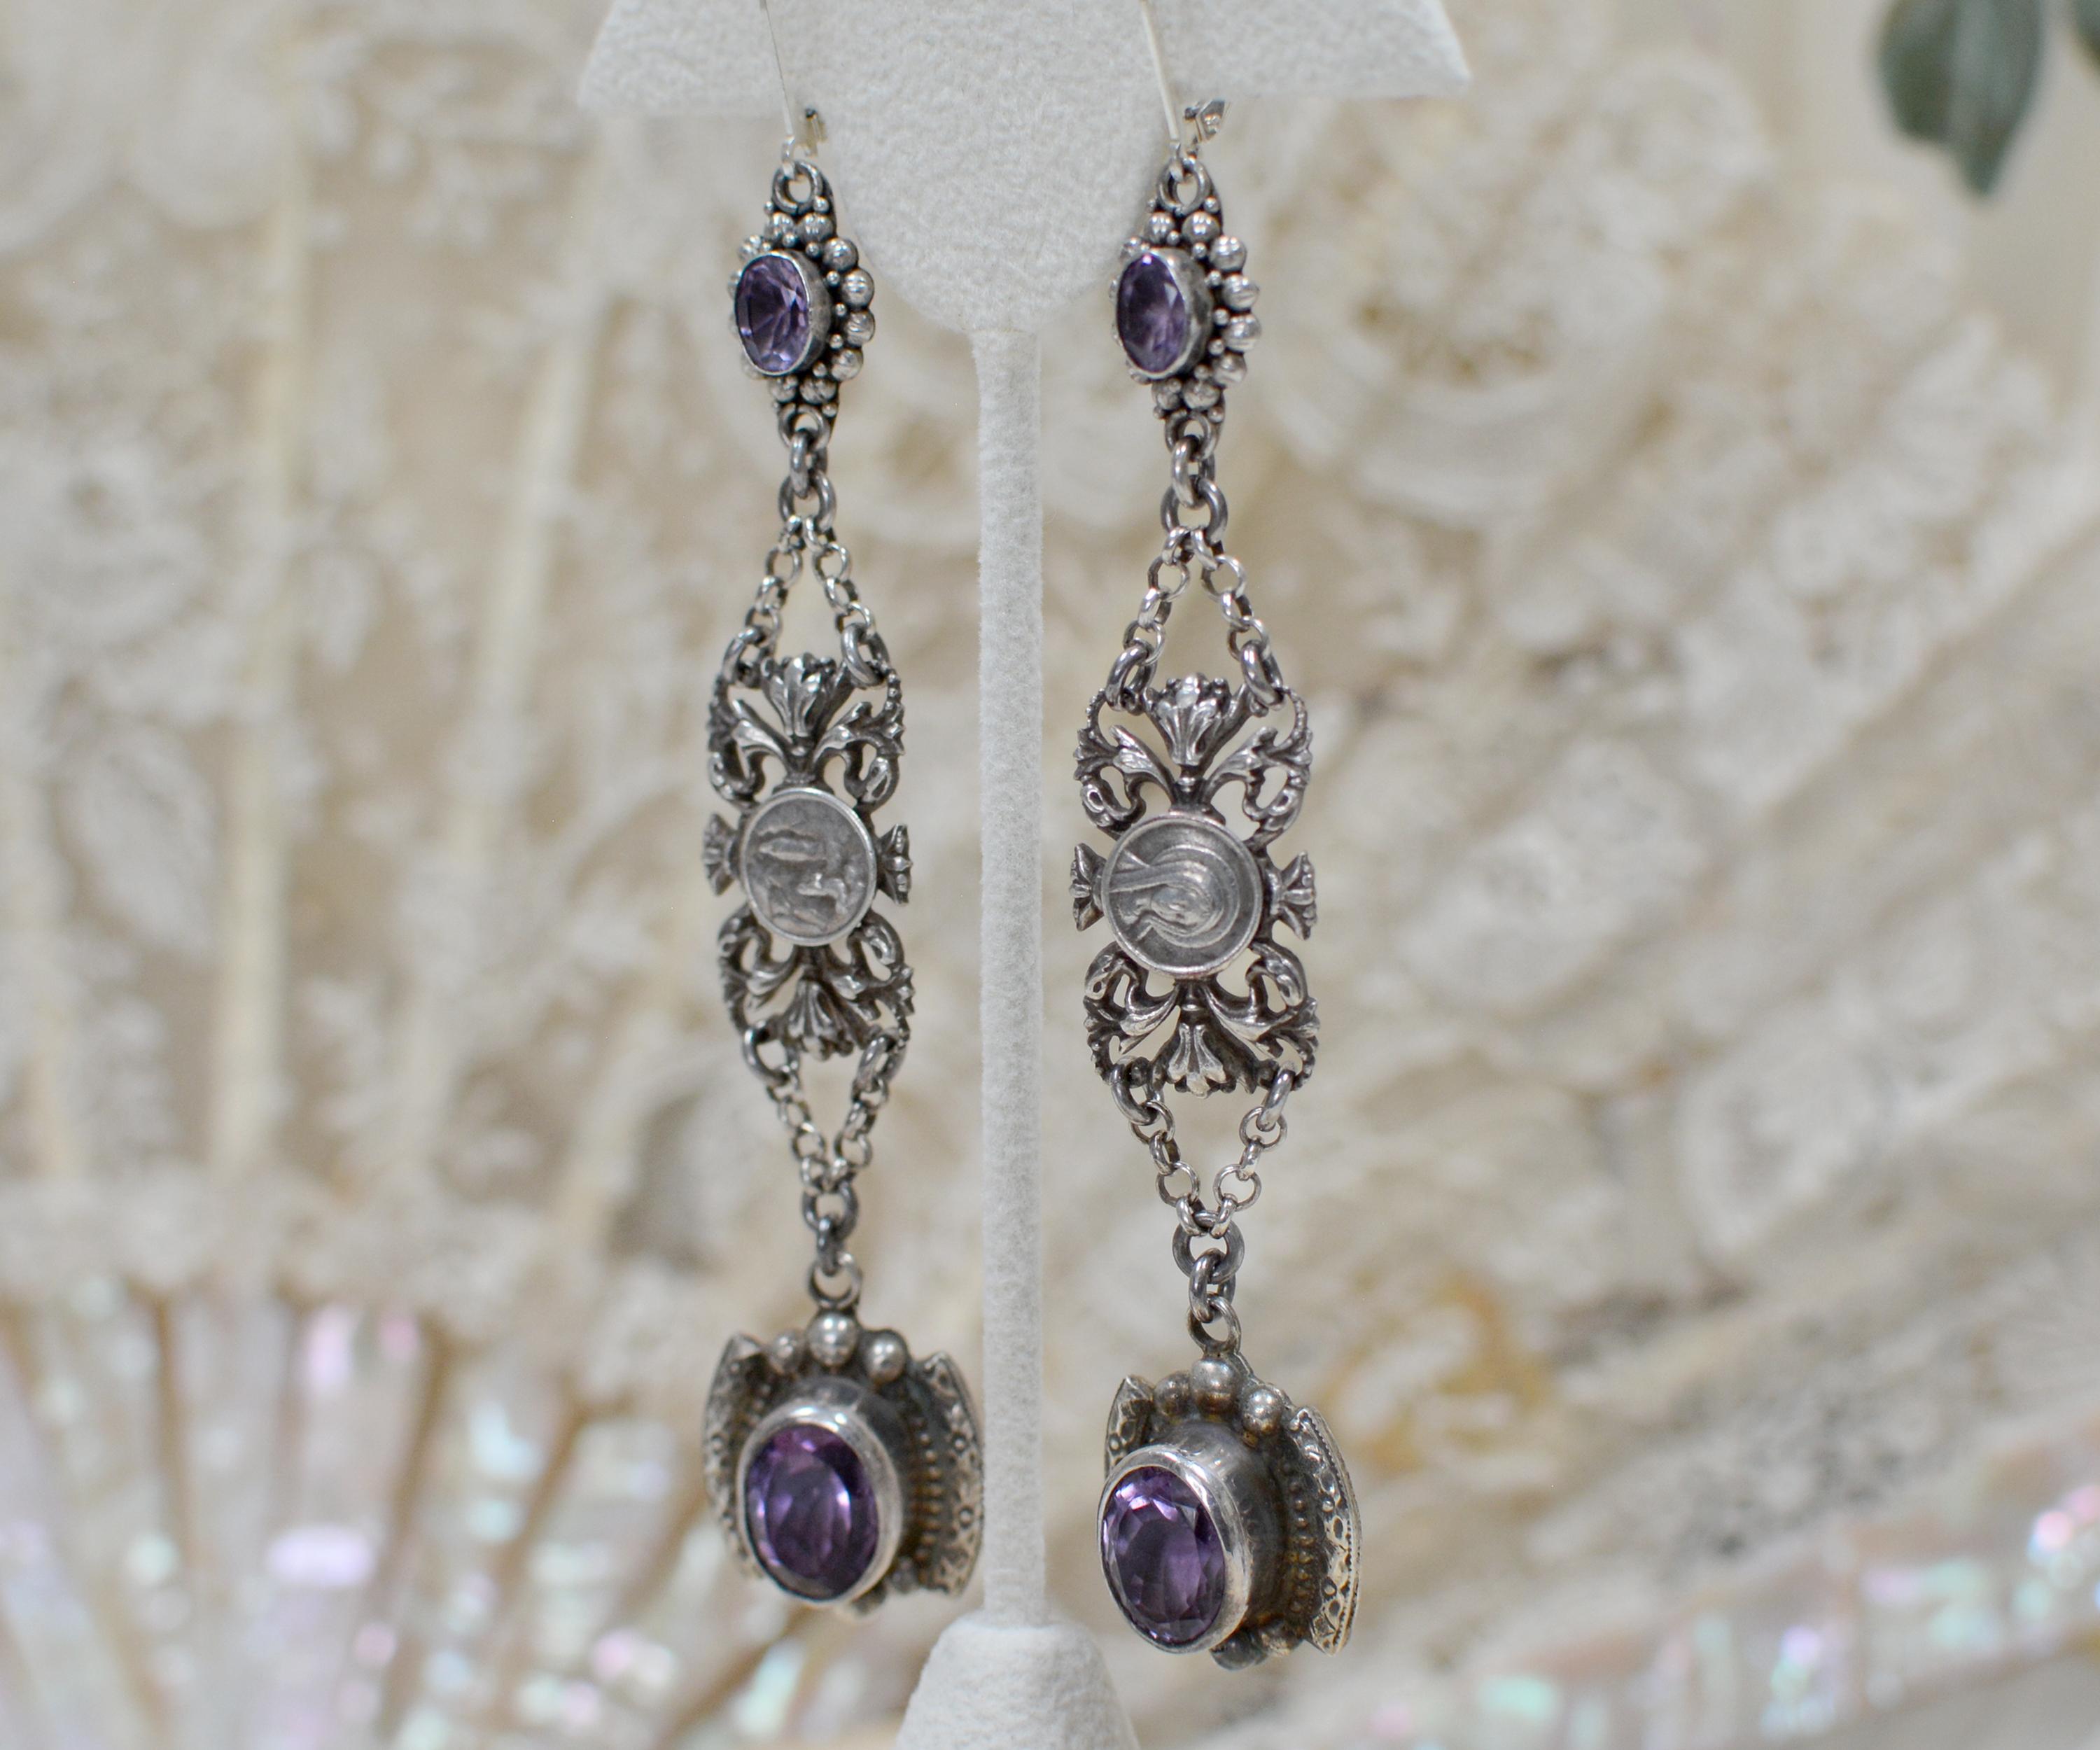 Rococo Jill Garber Amethyst Drop Earrings with Antique French Sacred Heart Medals